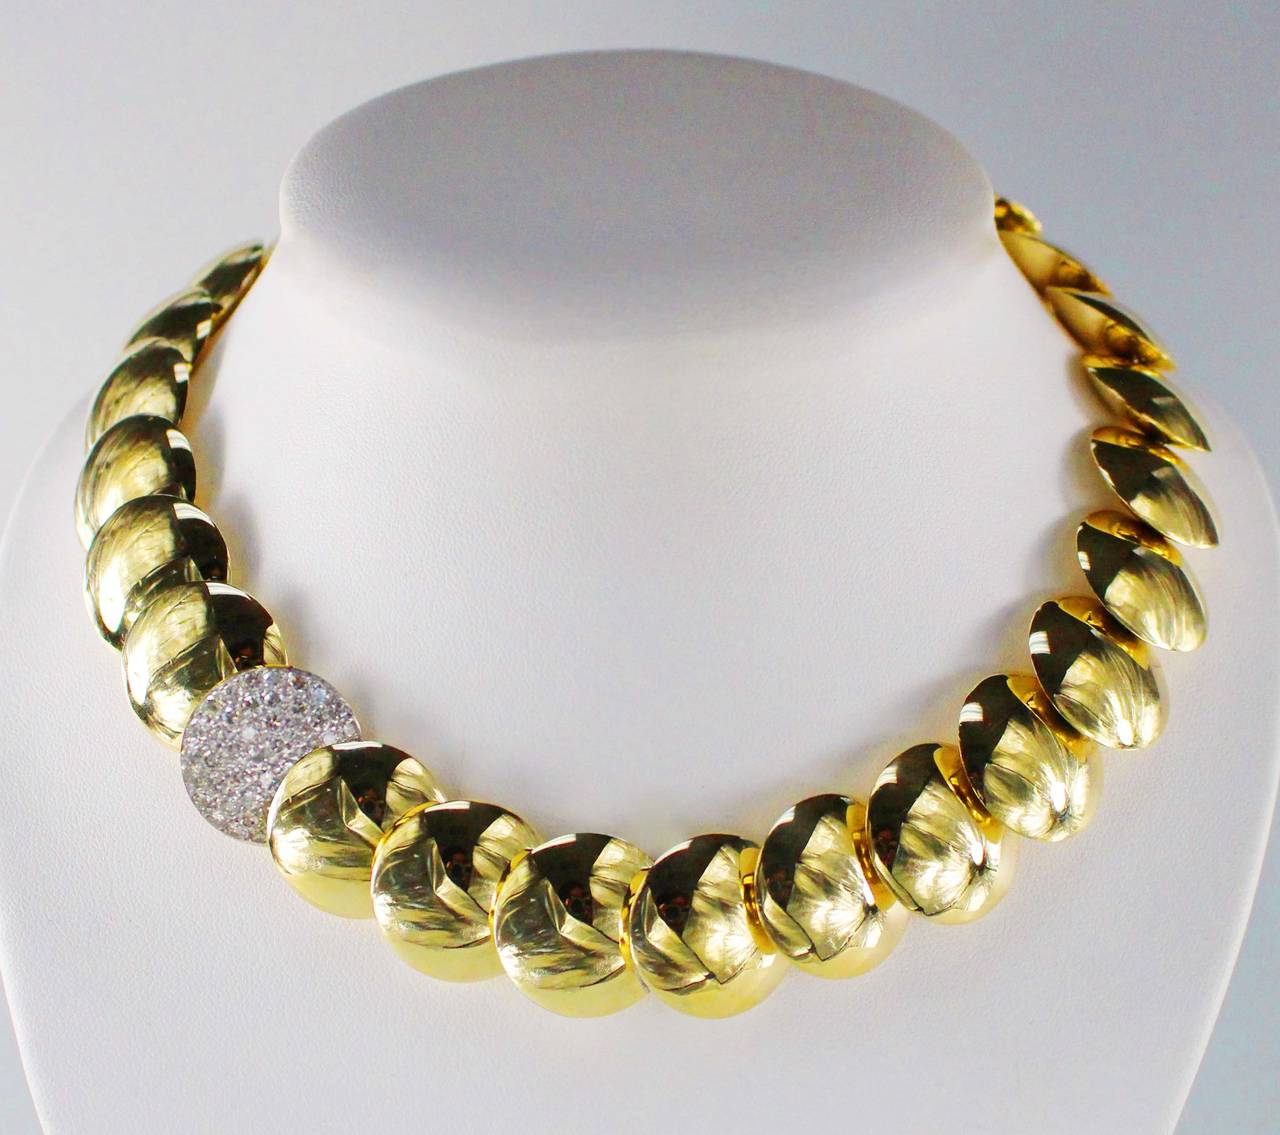 how to polish gold necklace